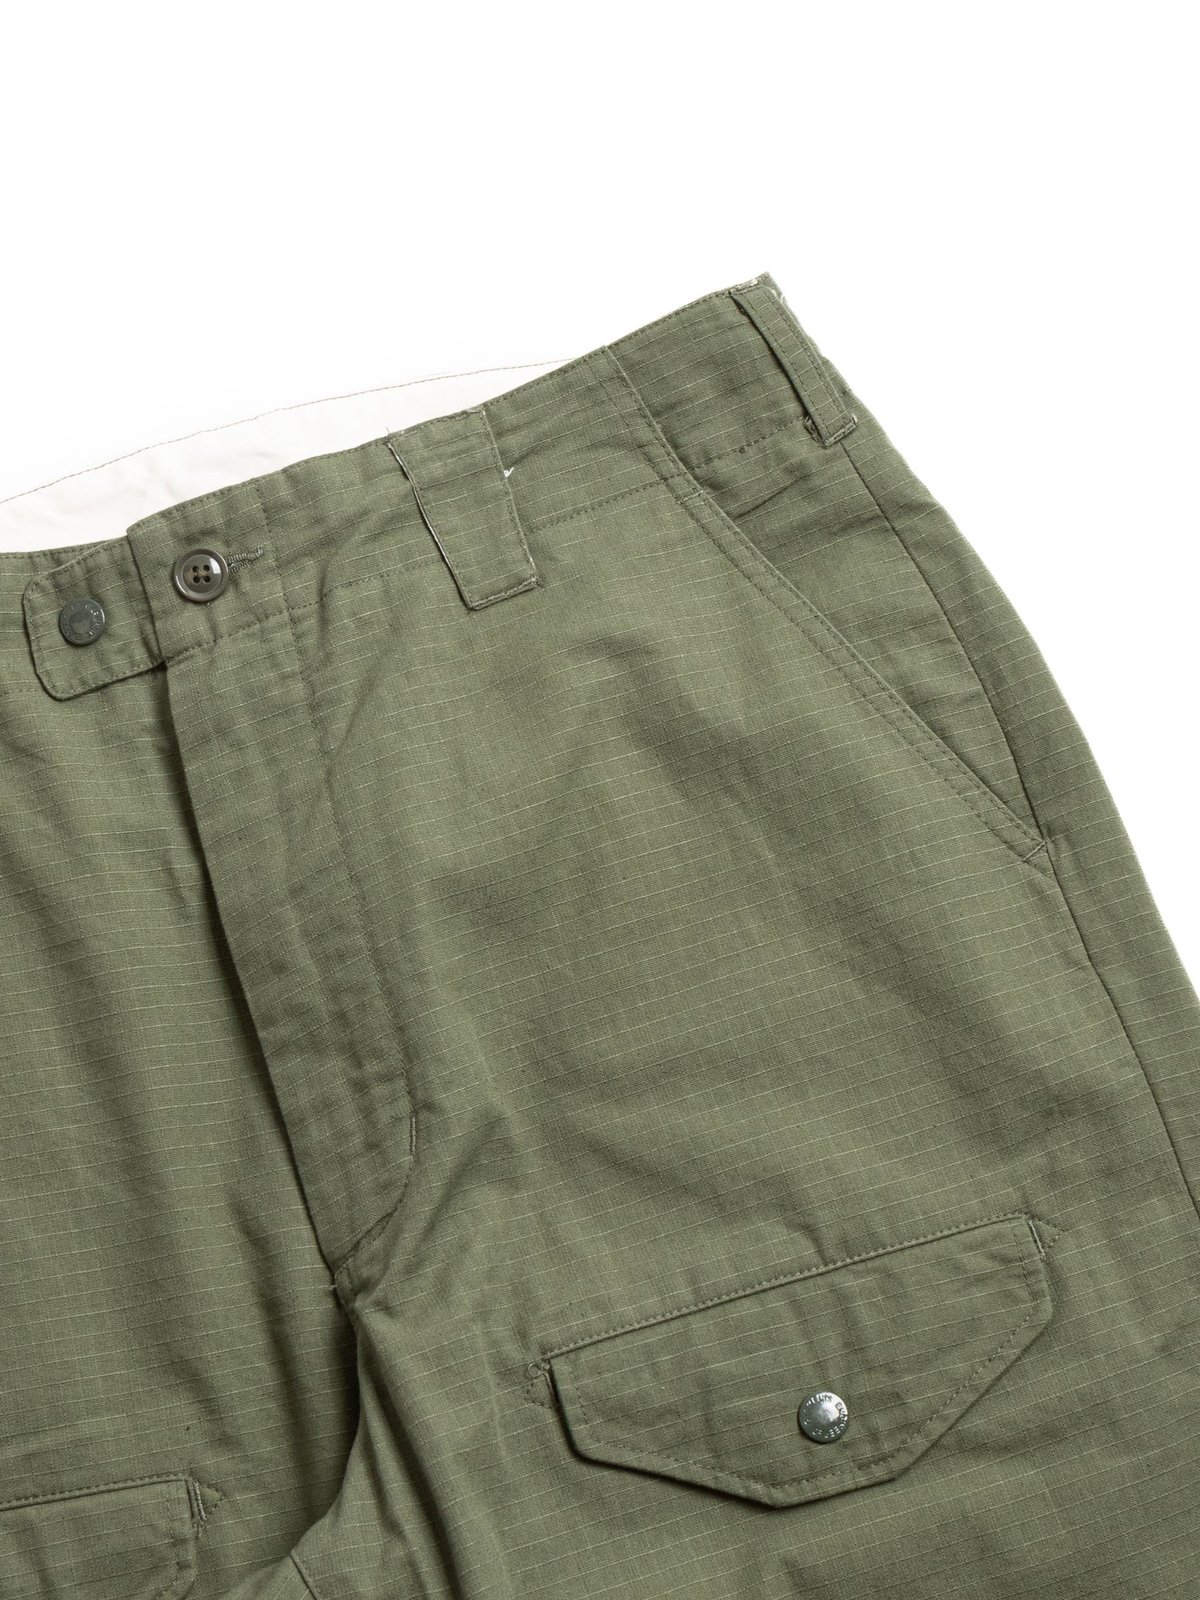 AIRBORNE PANT OLIVE COTTON RIPSTOP by Engineered Garments – The Bureau ...